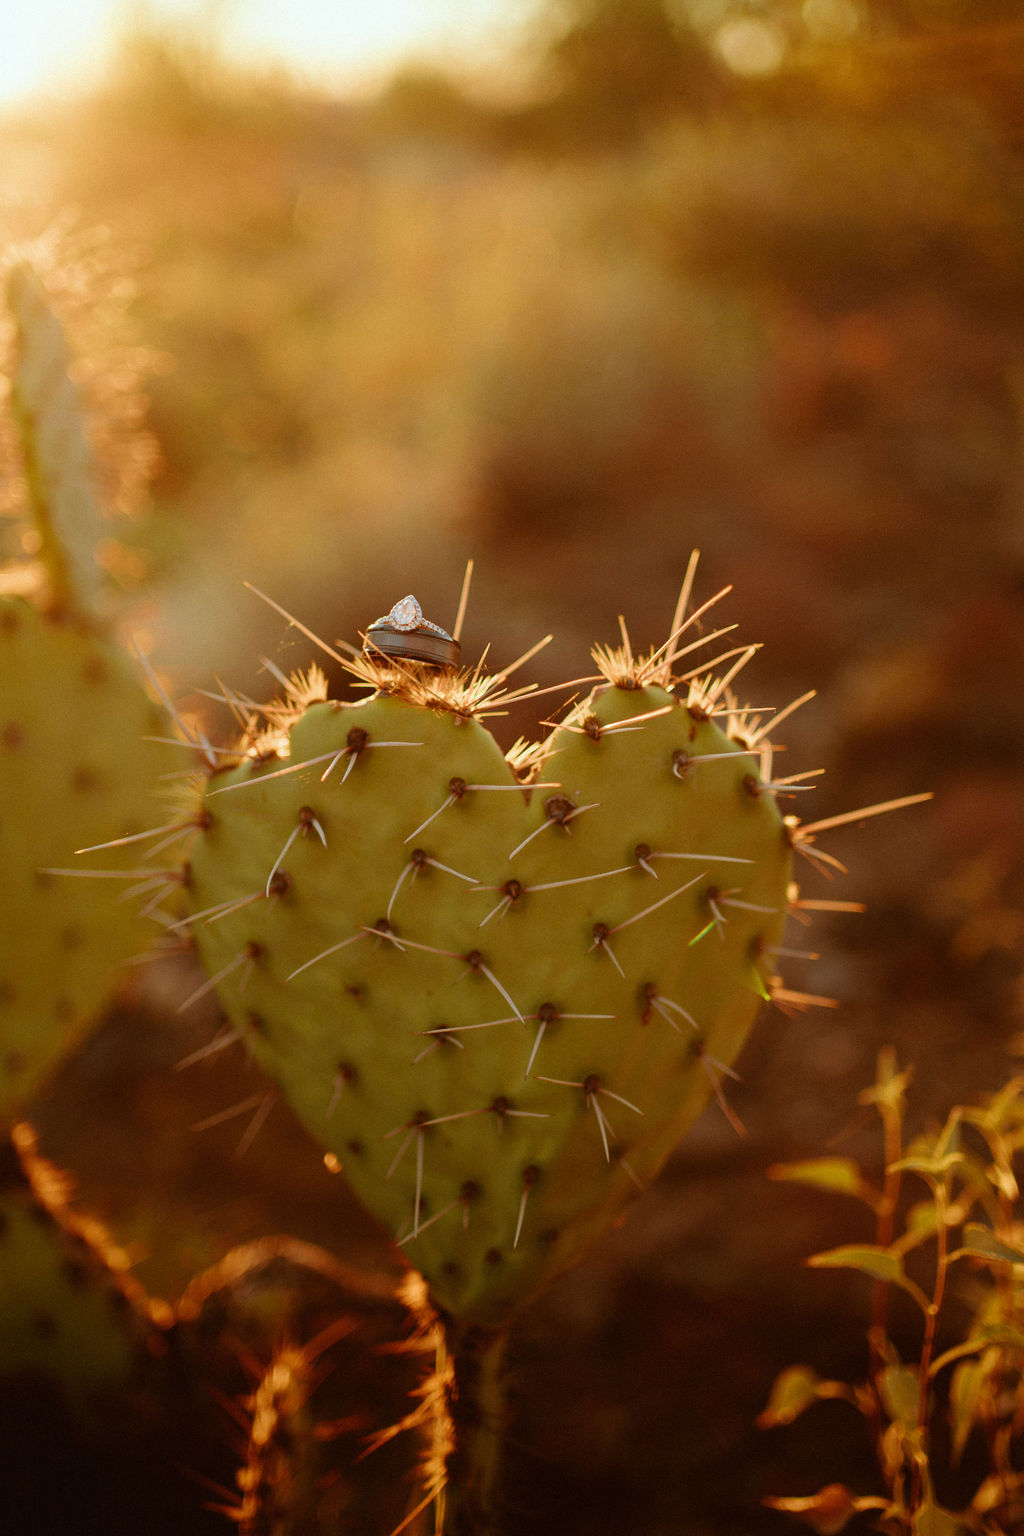 Saguaro National Park Micro-Wedding. The bride and grooms wedding rings on a heart shaped cactus